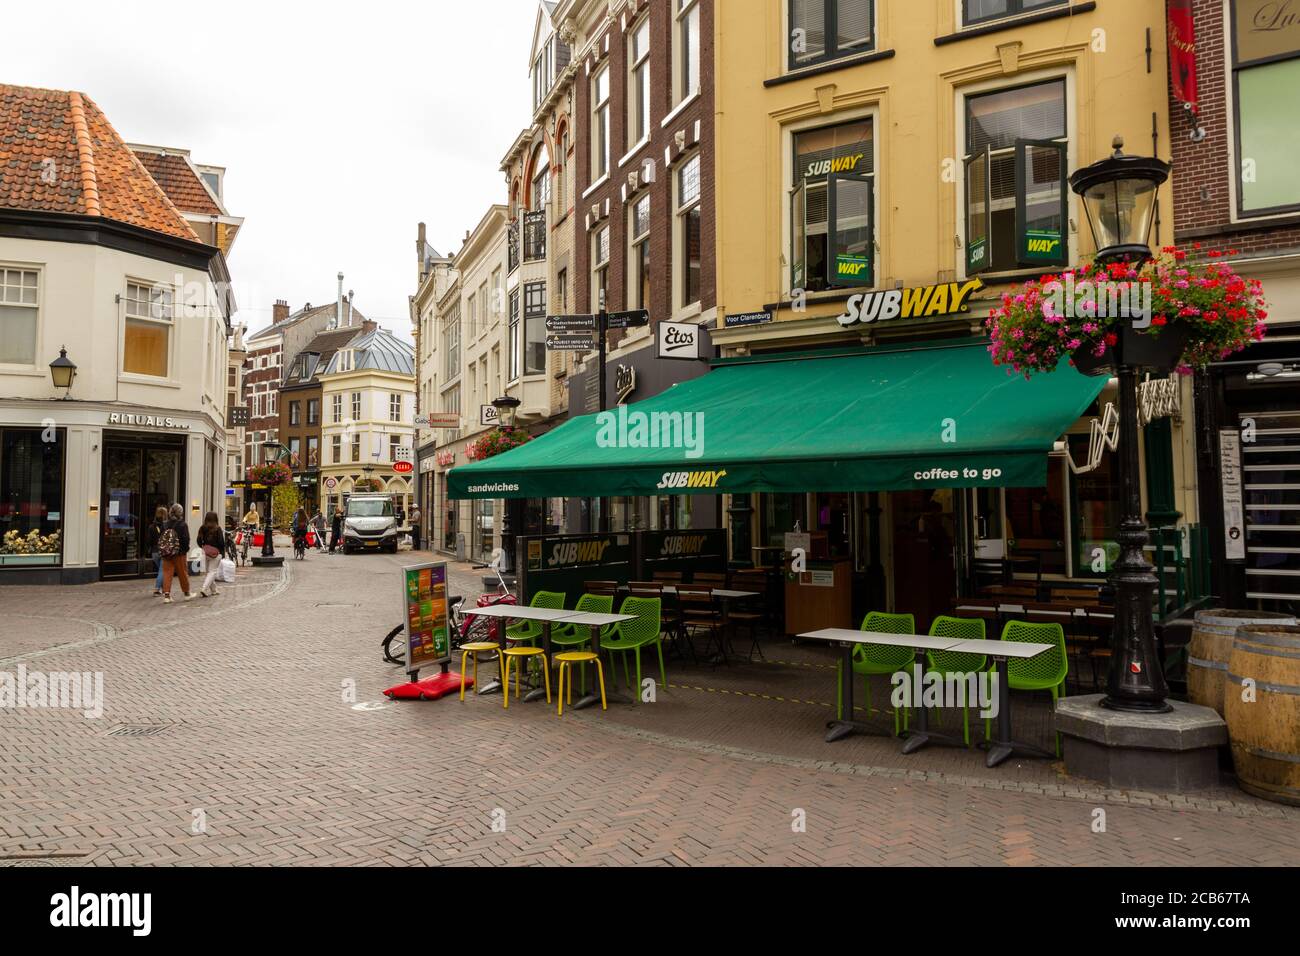 Subway shop in a shopping street in Utrecht Stock Photo